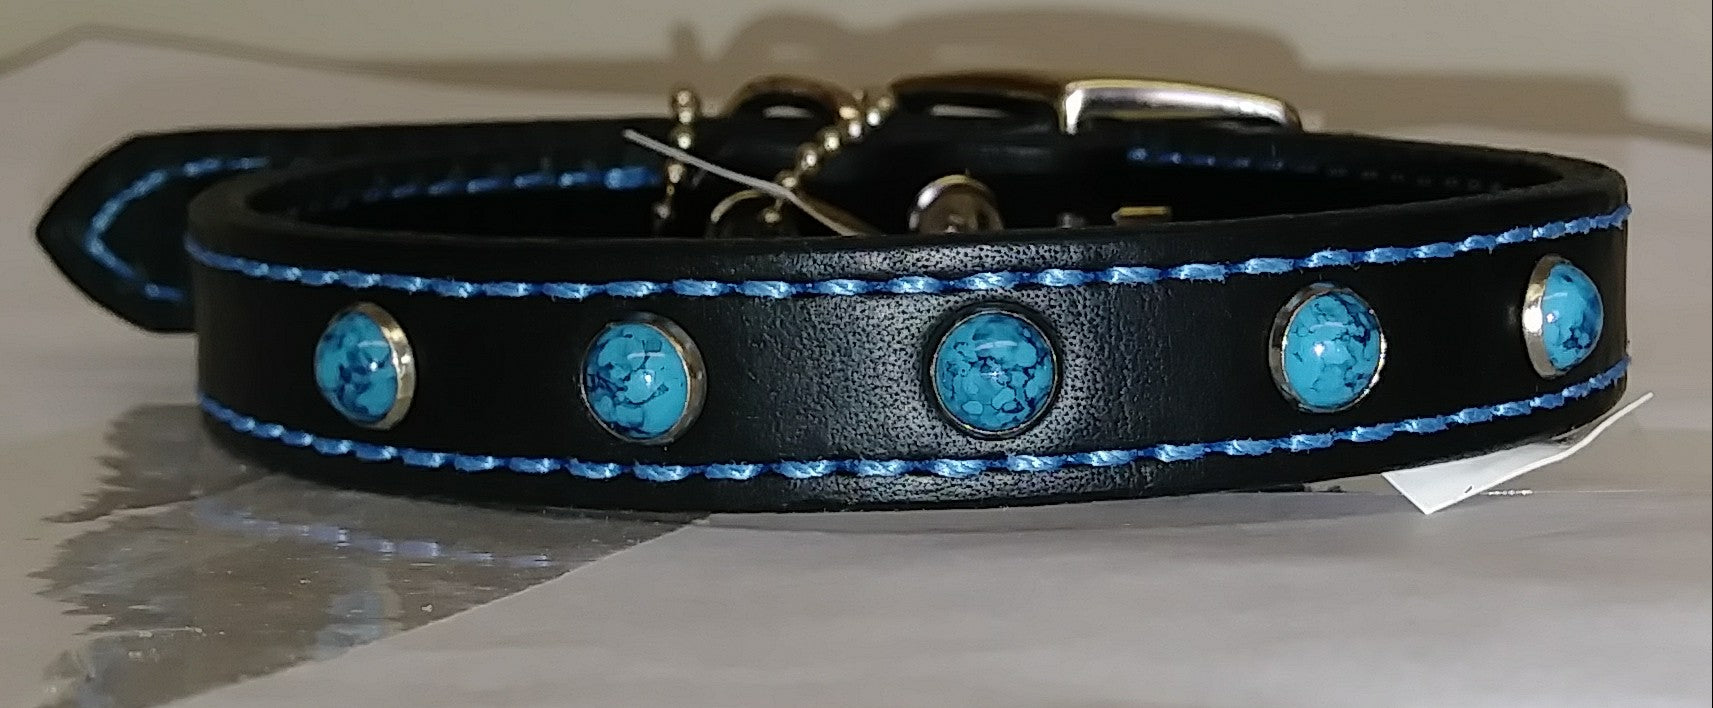 14" Black Leather Dog Collar with Turquoise Beads and Stitching